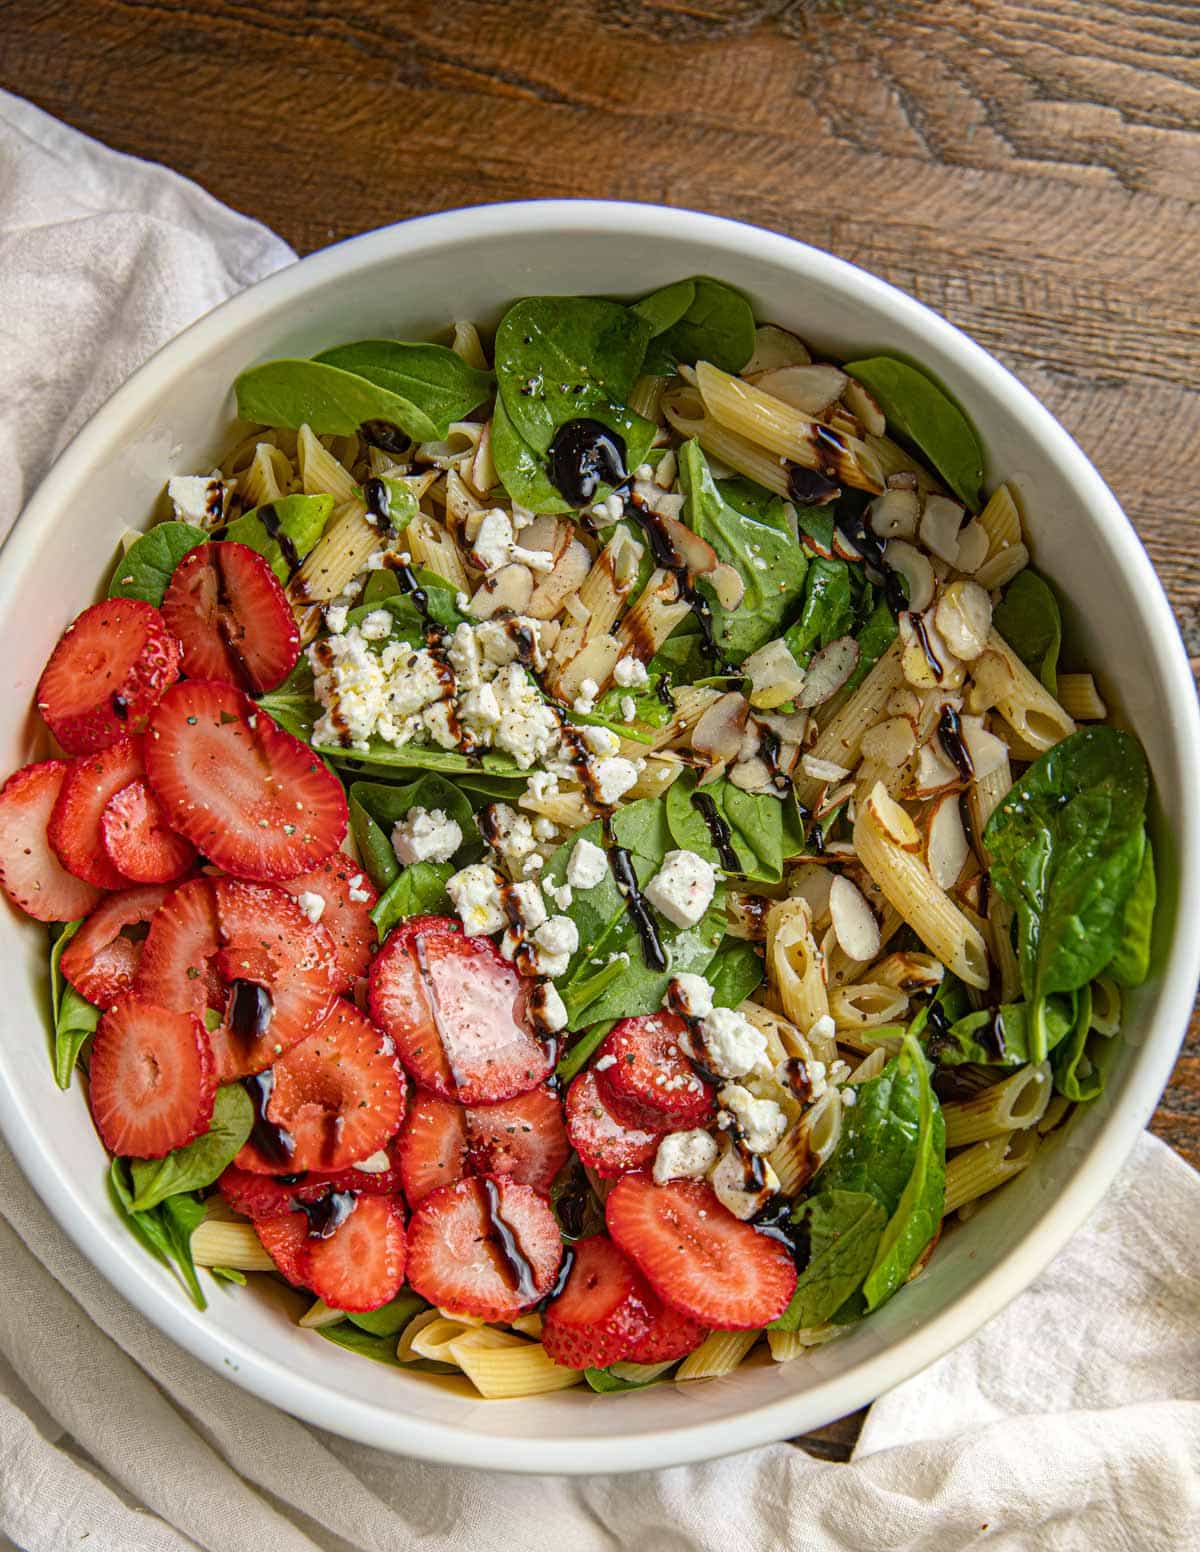 Strawberry Spinach Pasta Salad with balsamic drizzle